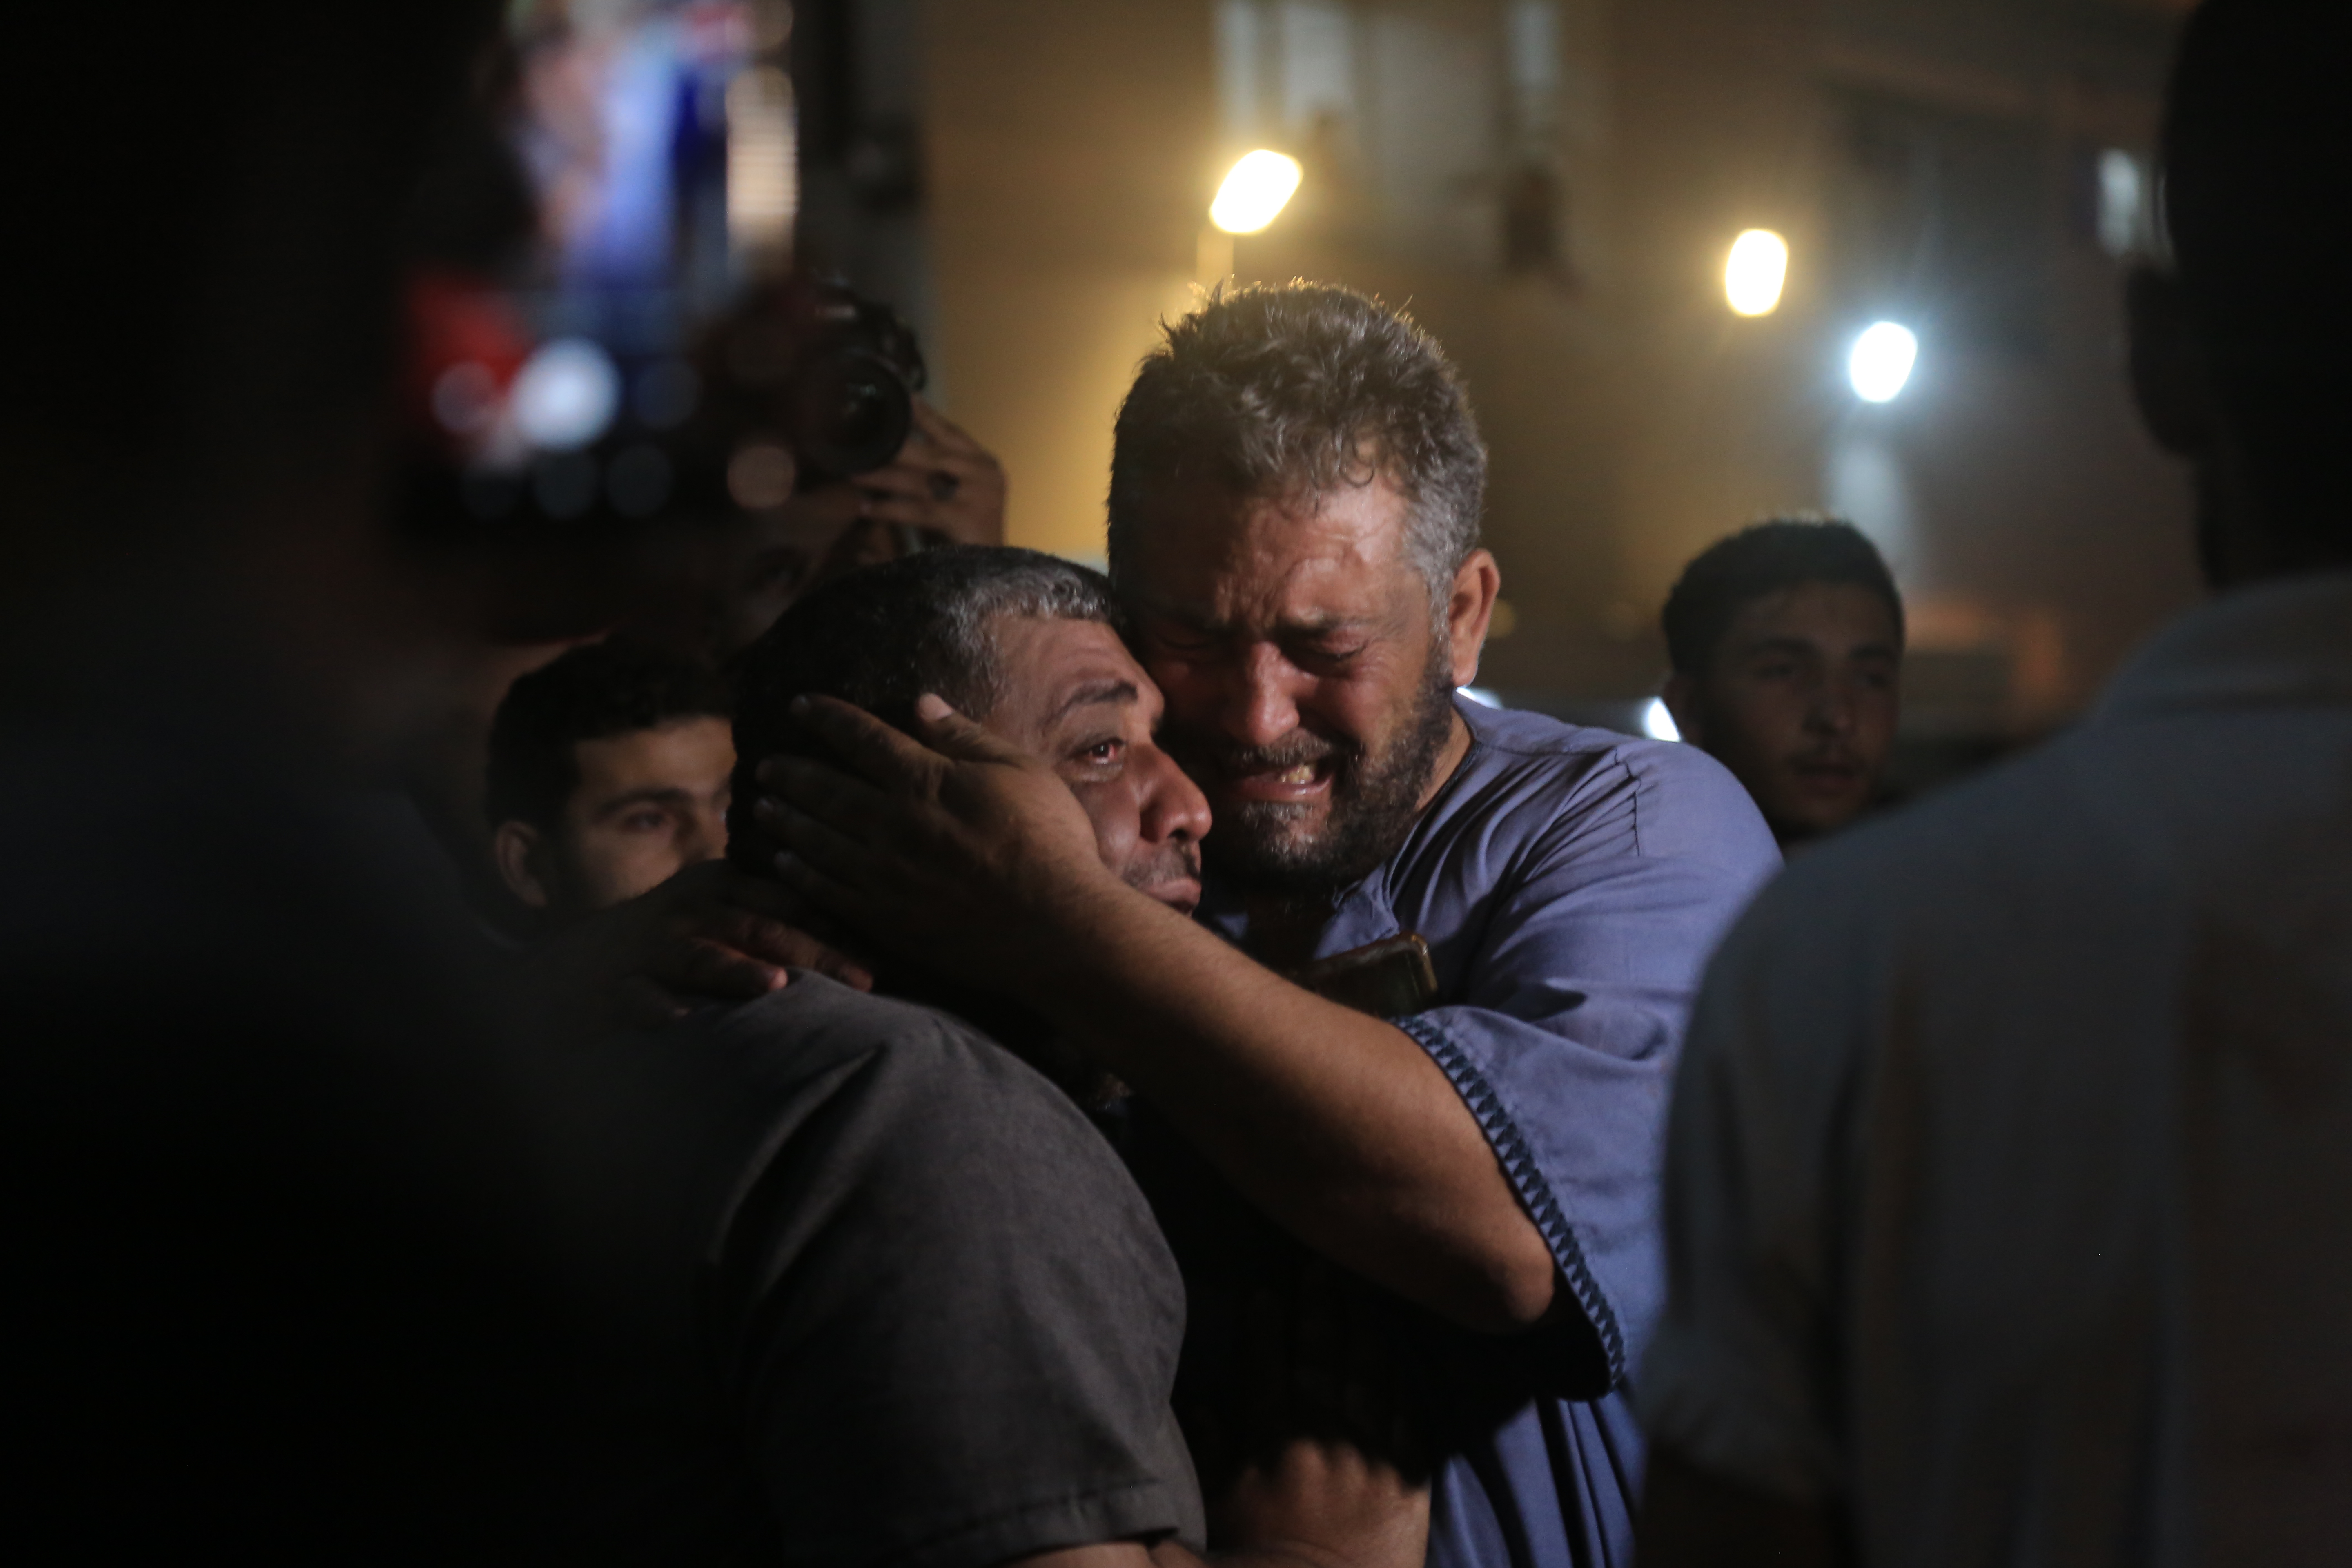 The father and uncle of 12-year-old Yahya Khalifa crying at Al-Shifa Hospital after confirming news of his death. Yahya was killed during an Israeli airstrike on Al-Zaytoun neighbourhood, East of Gaza City. Samar Abu Elouf for the New York Times (2021)